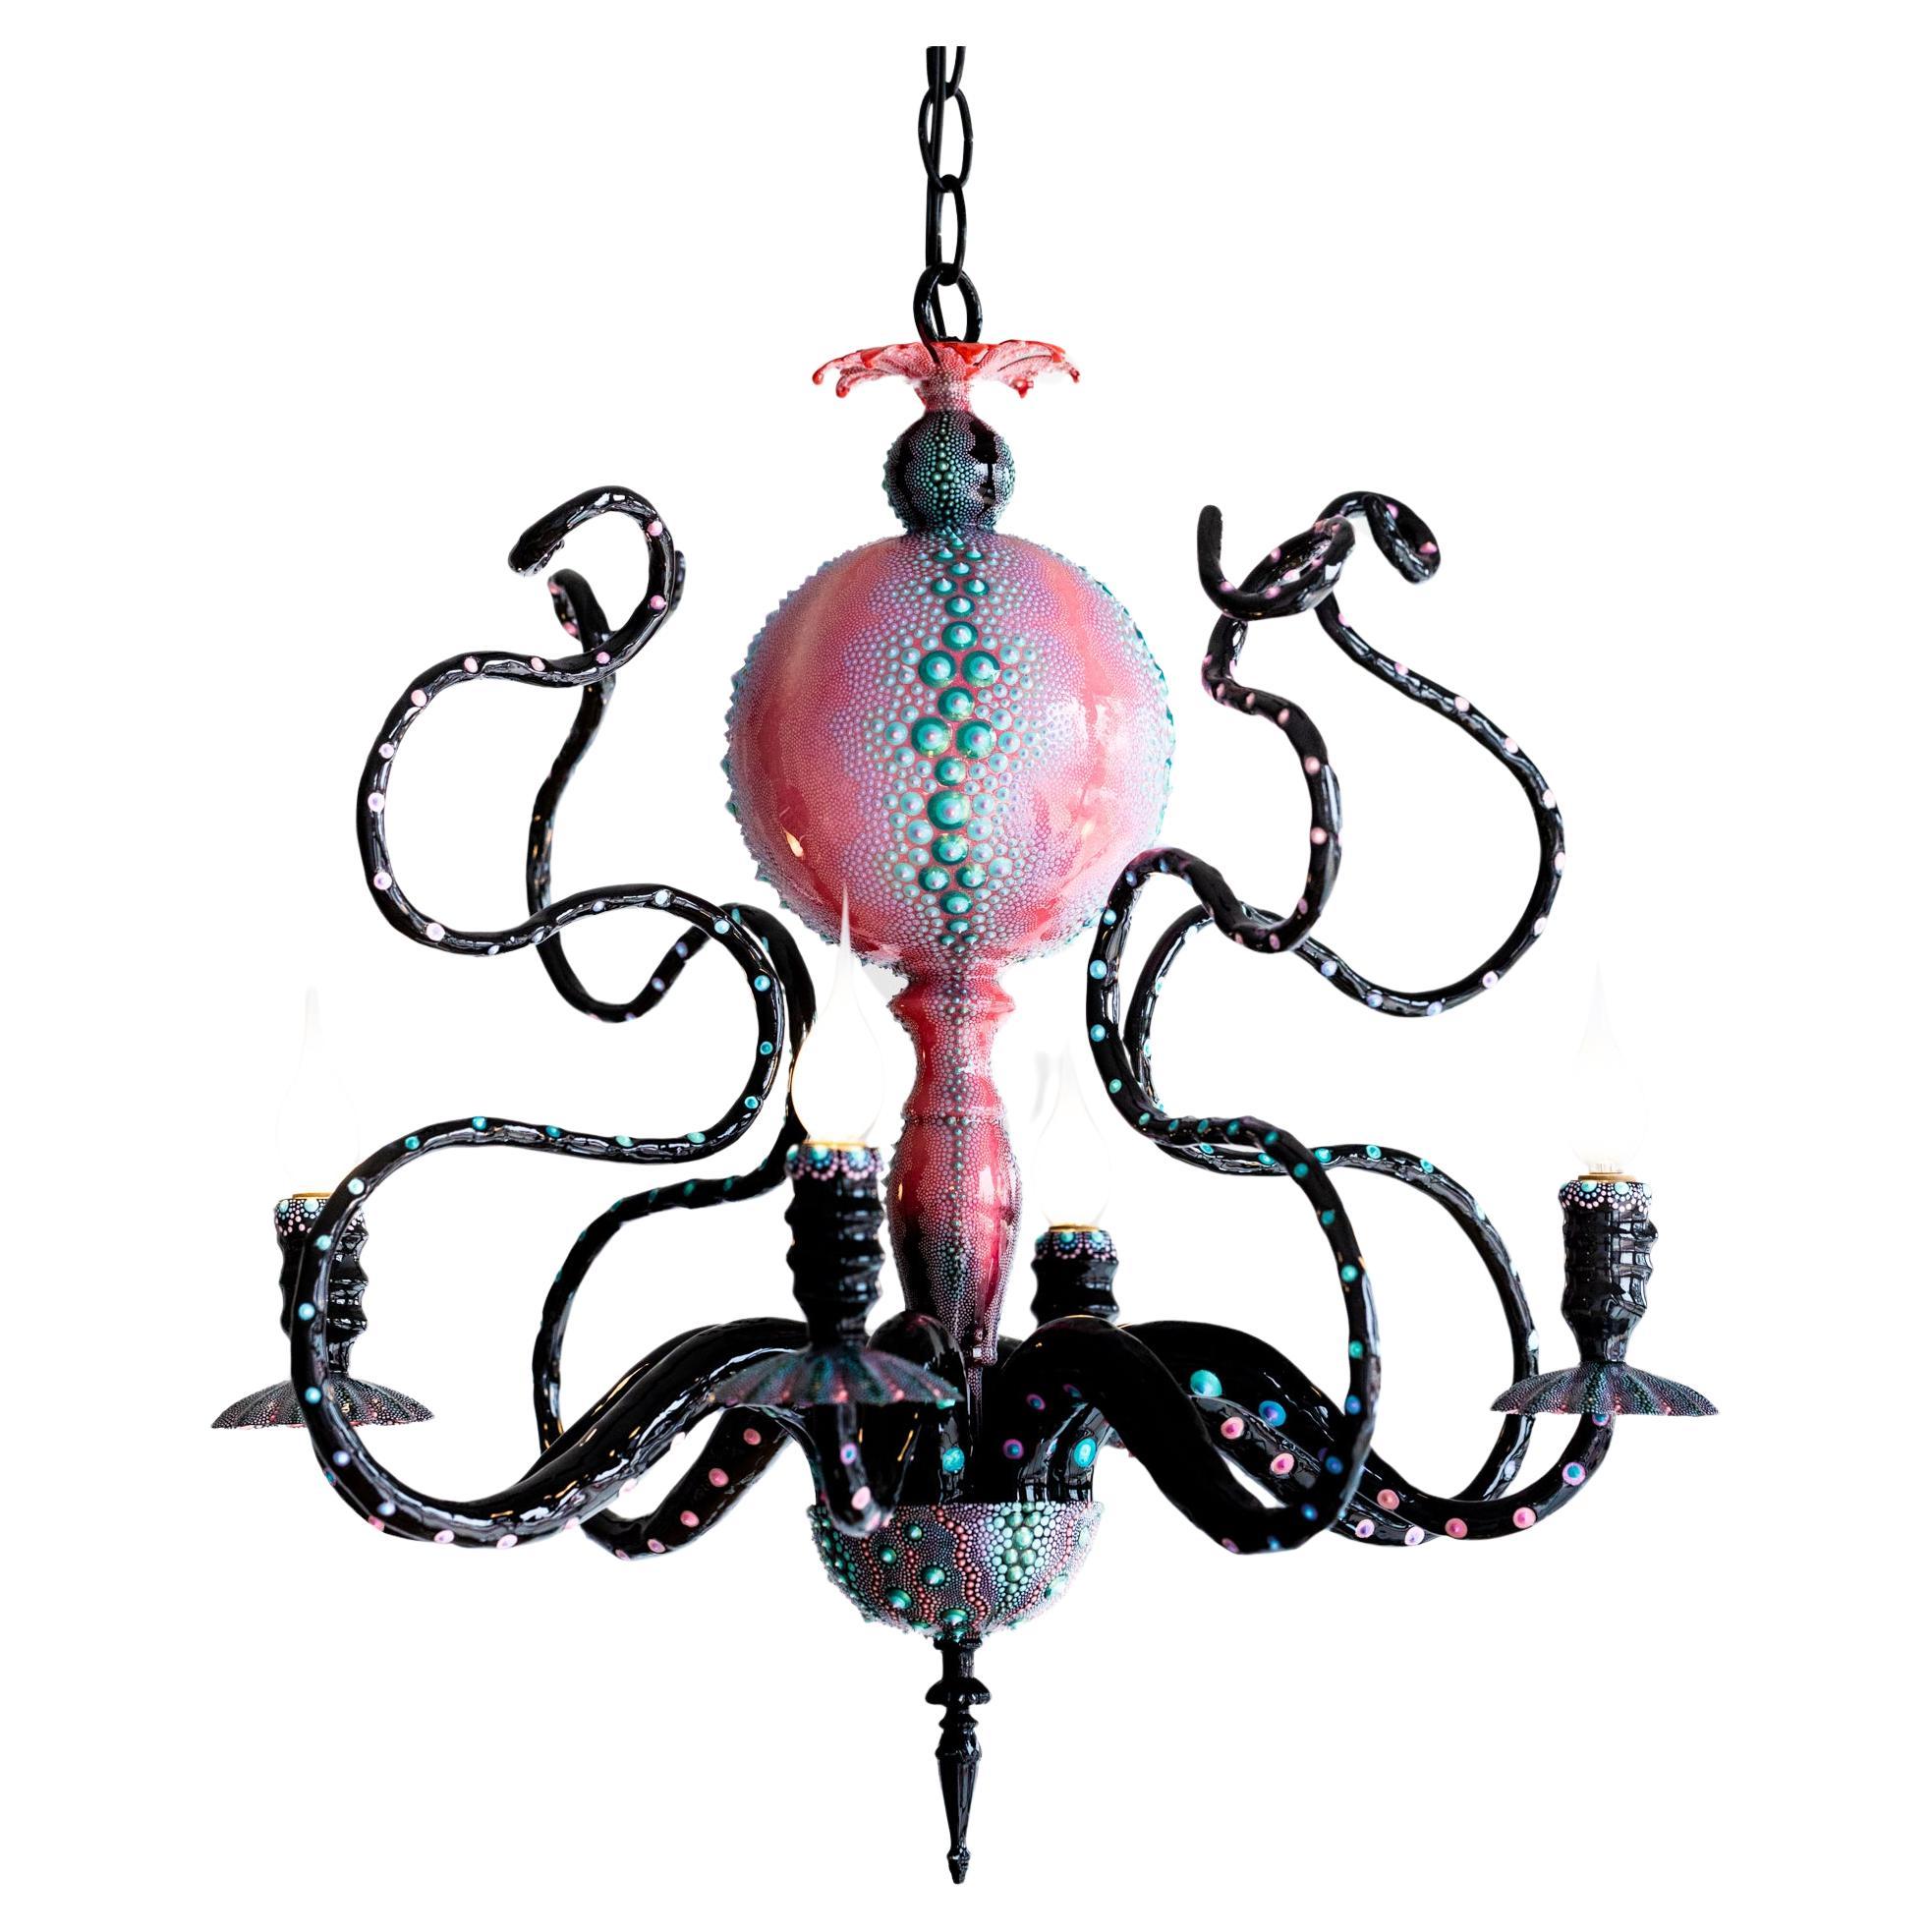 Hand-Painted and Sculpted Pink, Black, and Teal Octopus Chandelier